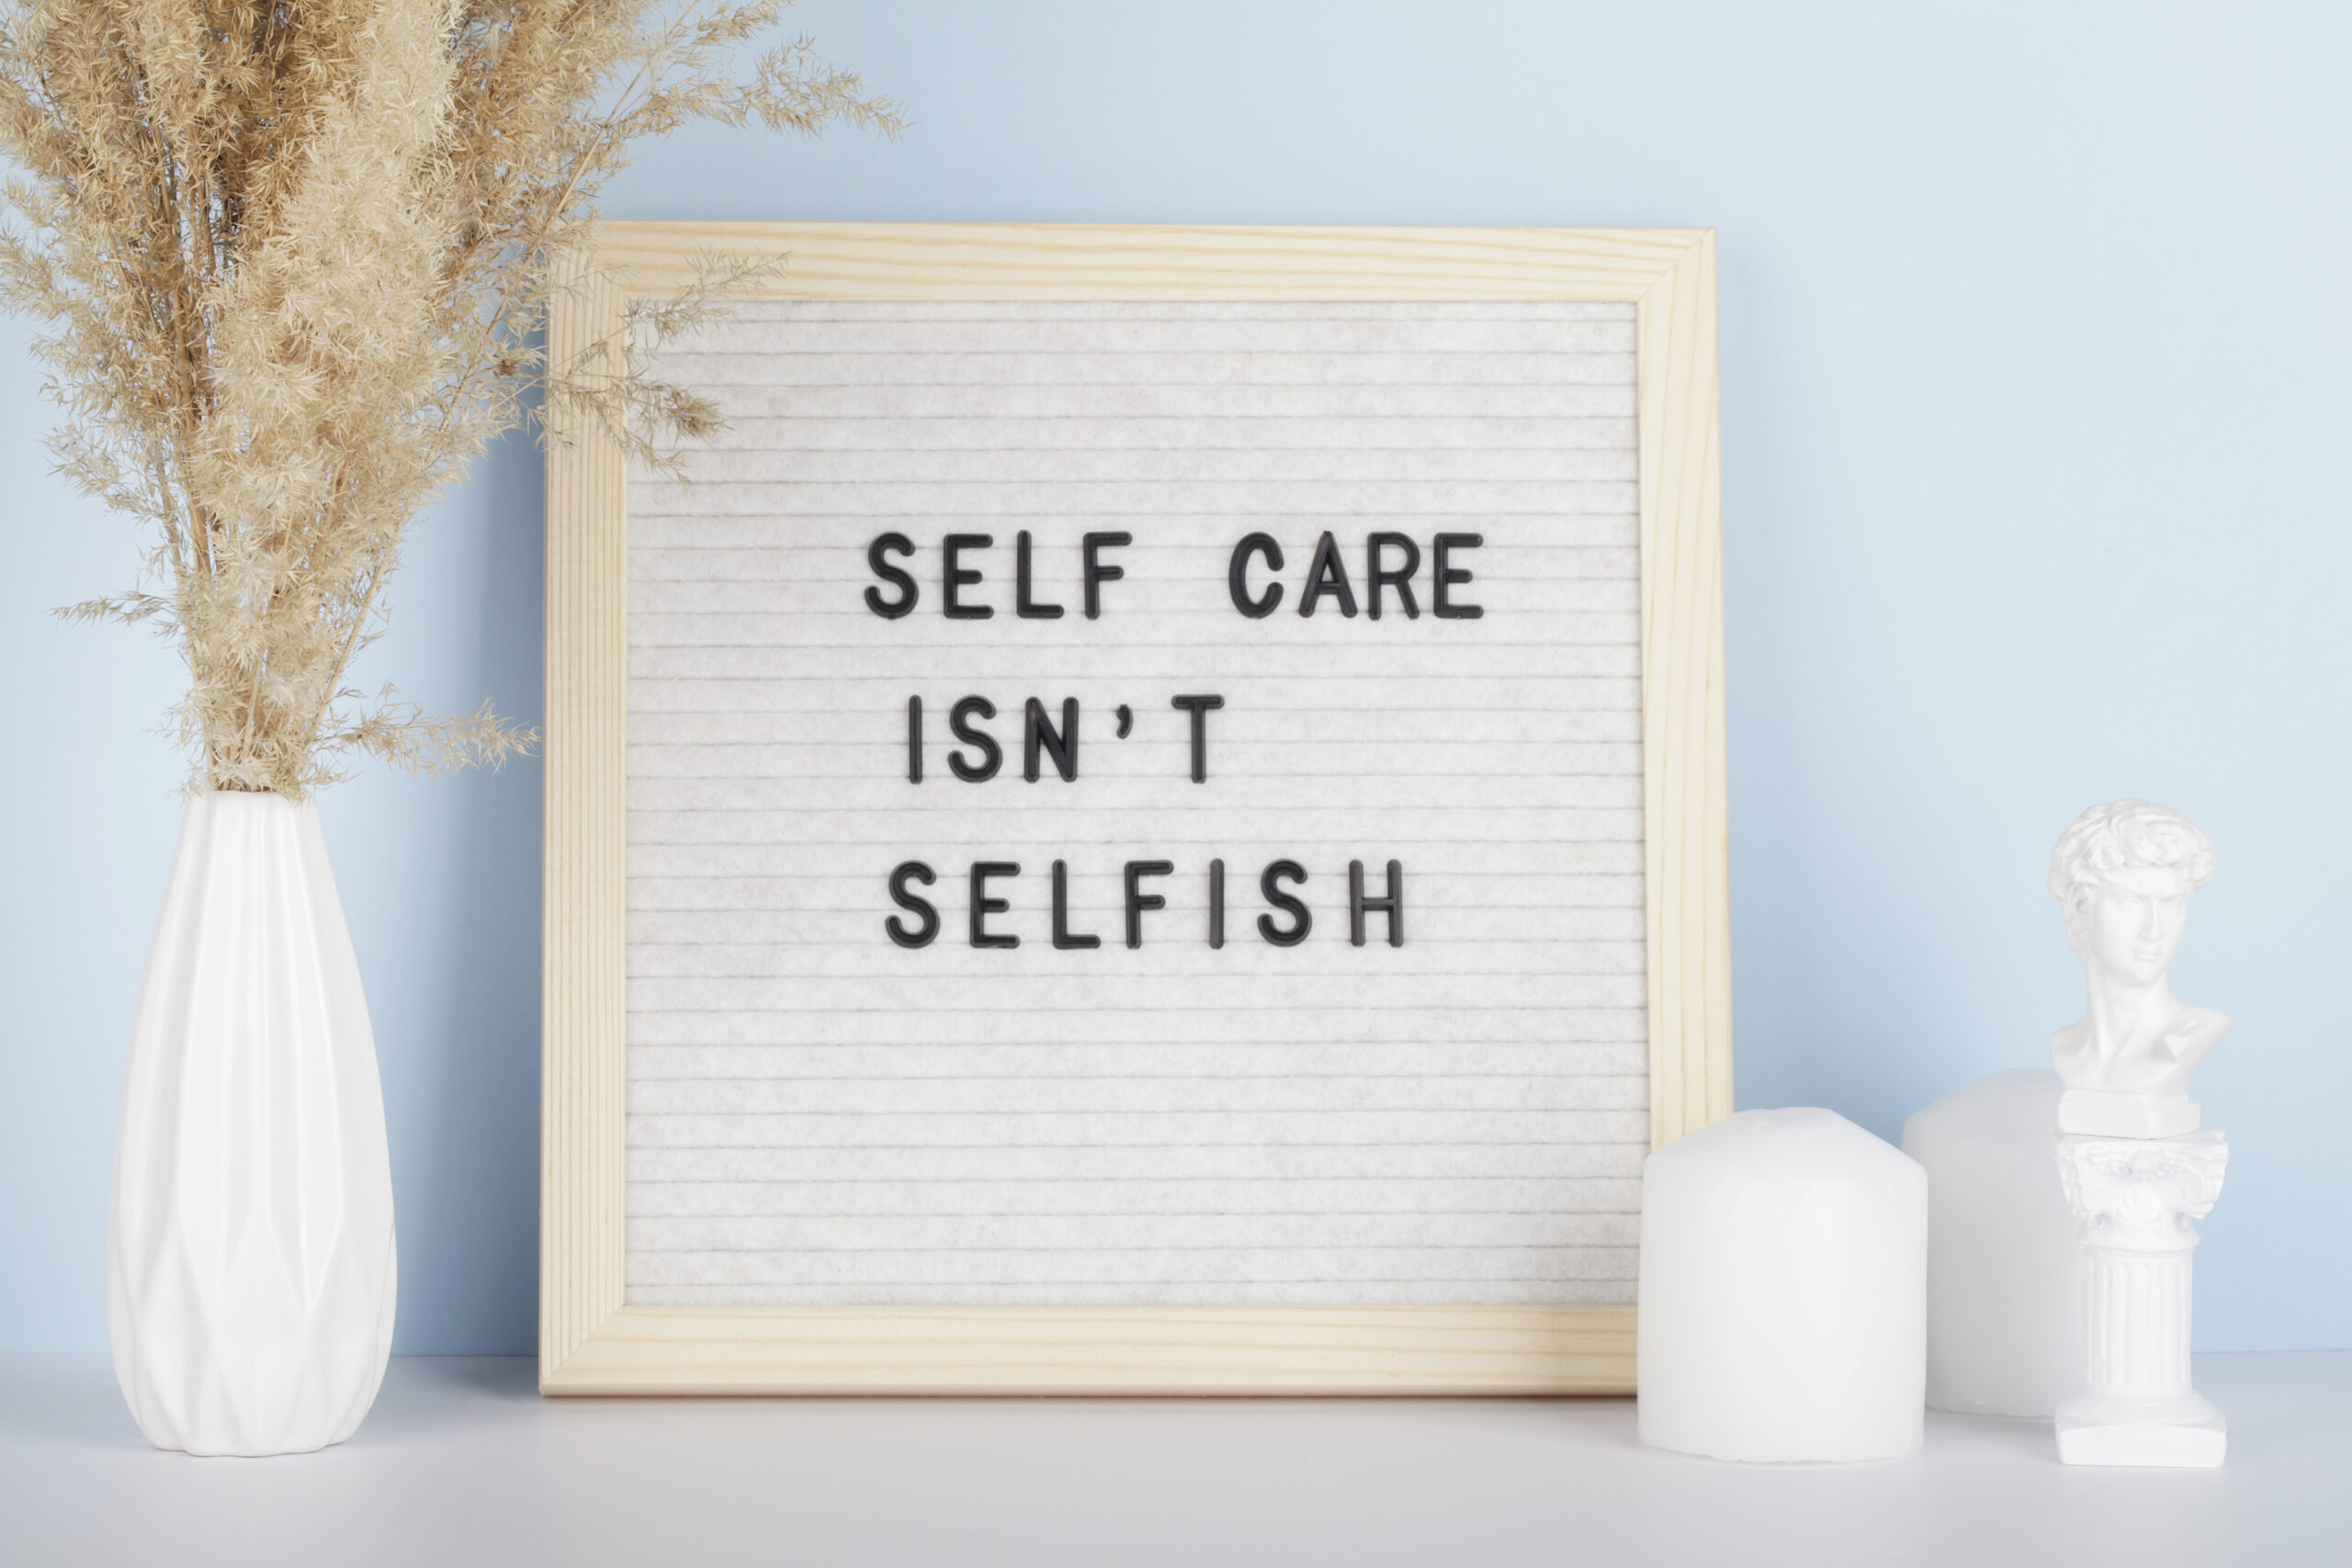 Self care isn't selfish - take radical acts of self-love & listen to your body